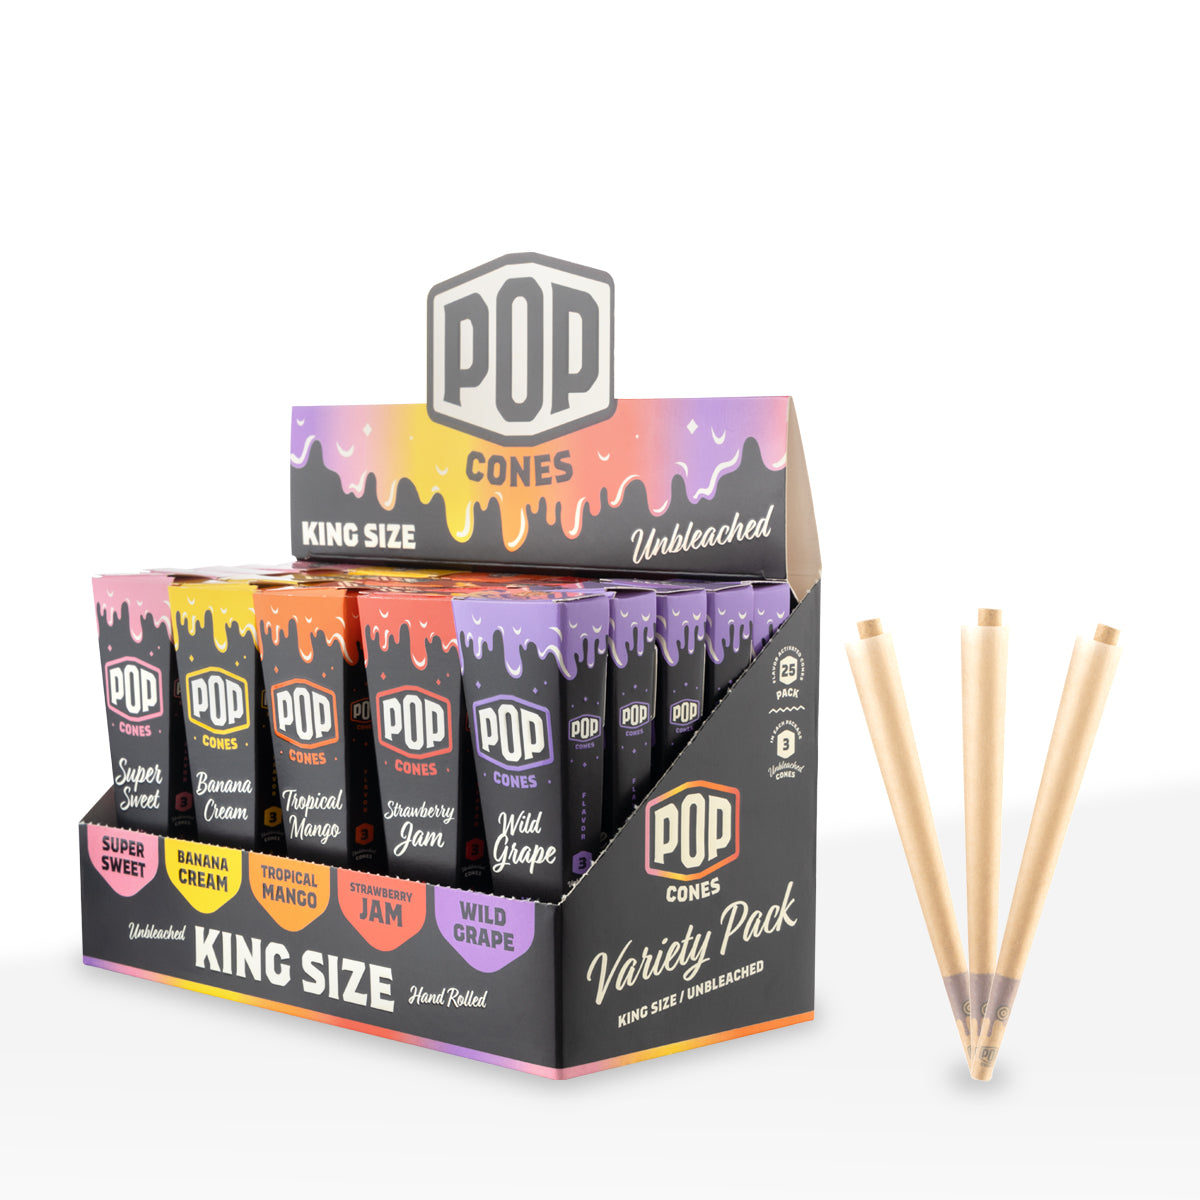 Pop Cones | Pre-Rolled Cones King Size | 109mm - Assorted Flavors - 3 Pack 25 Count - Unbleached Paper